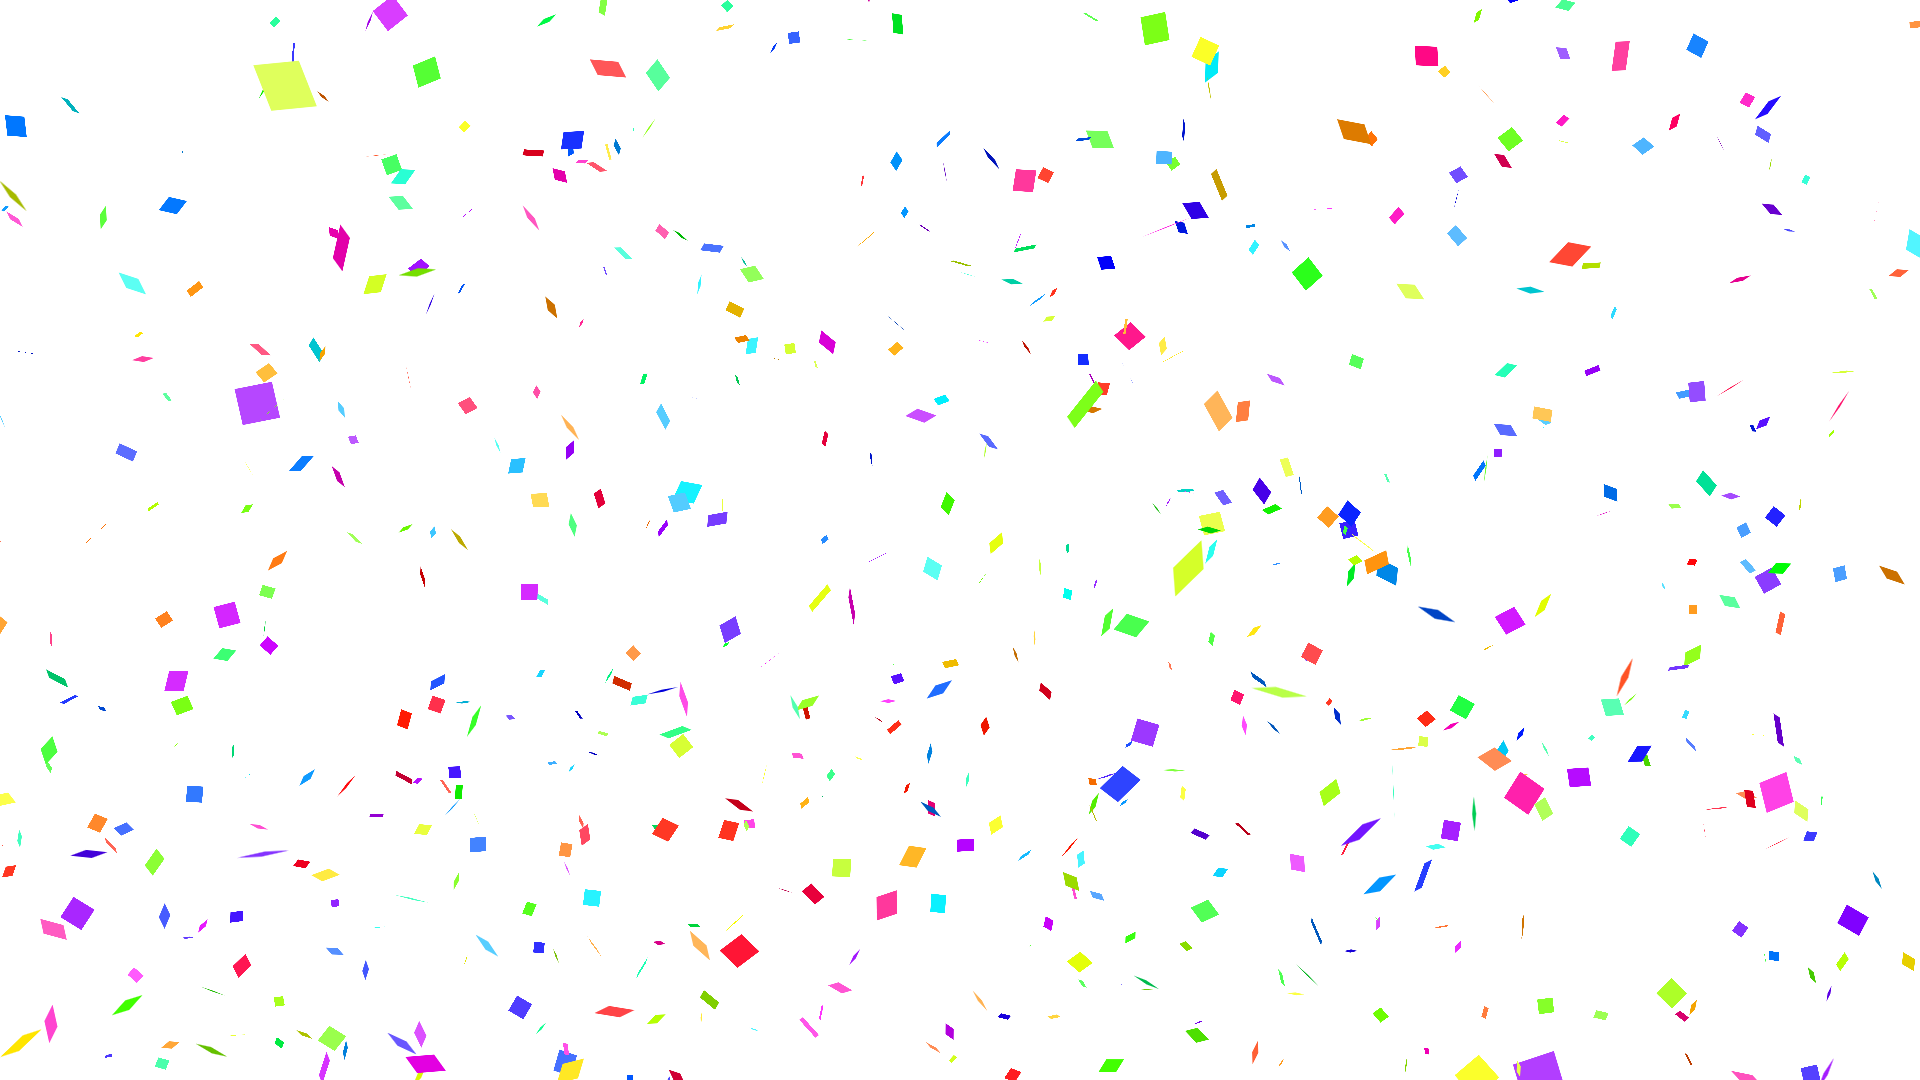 confetti overlay effect in photoshop free download